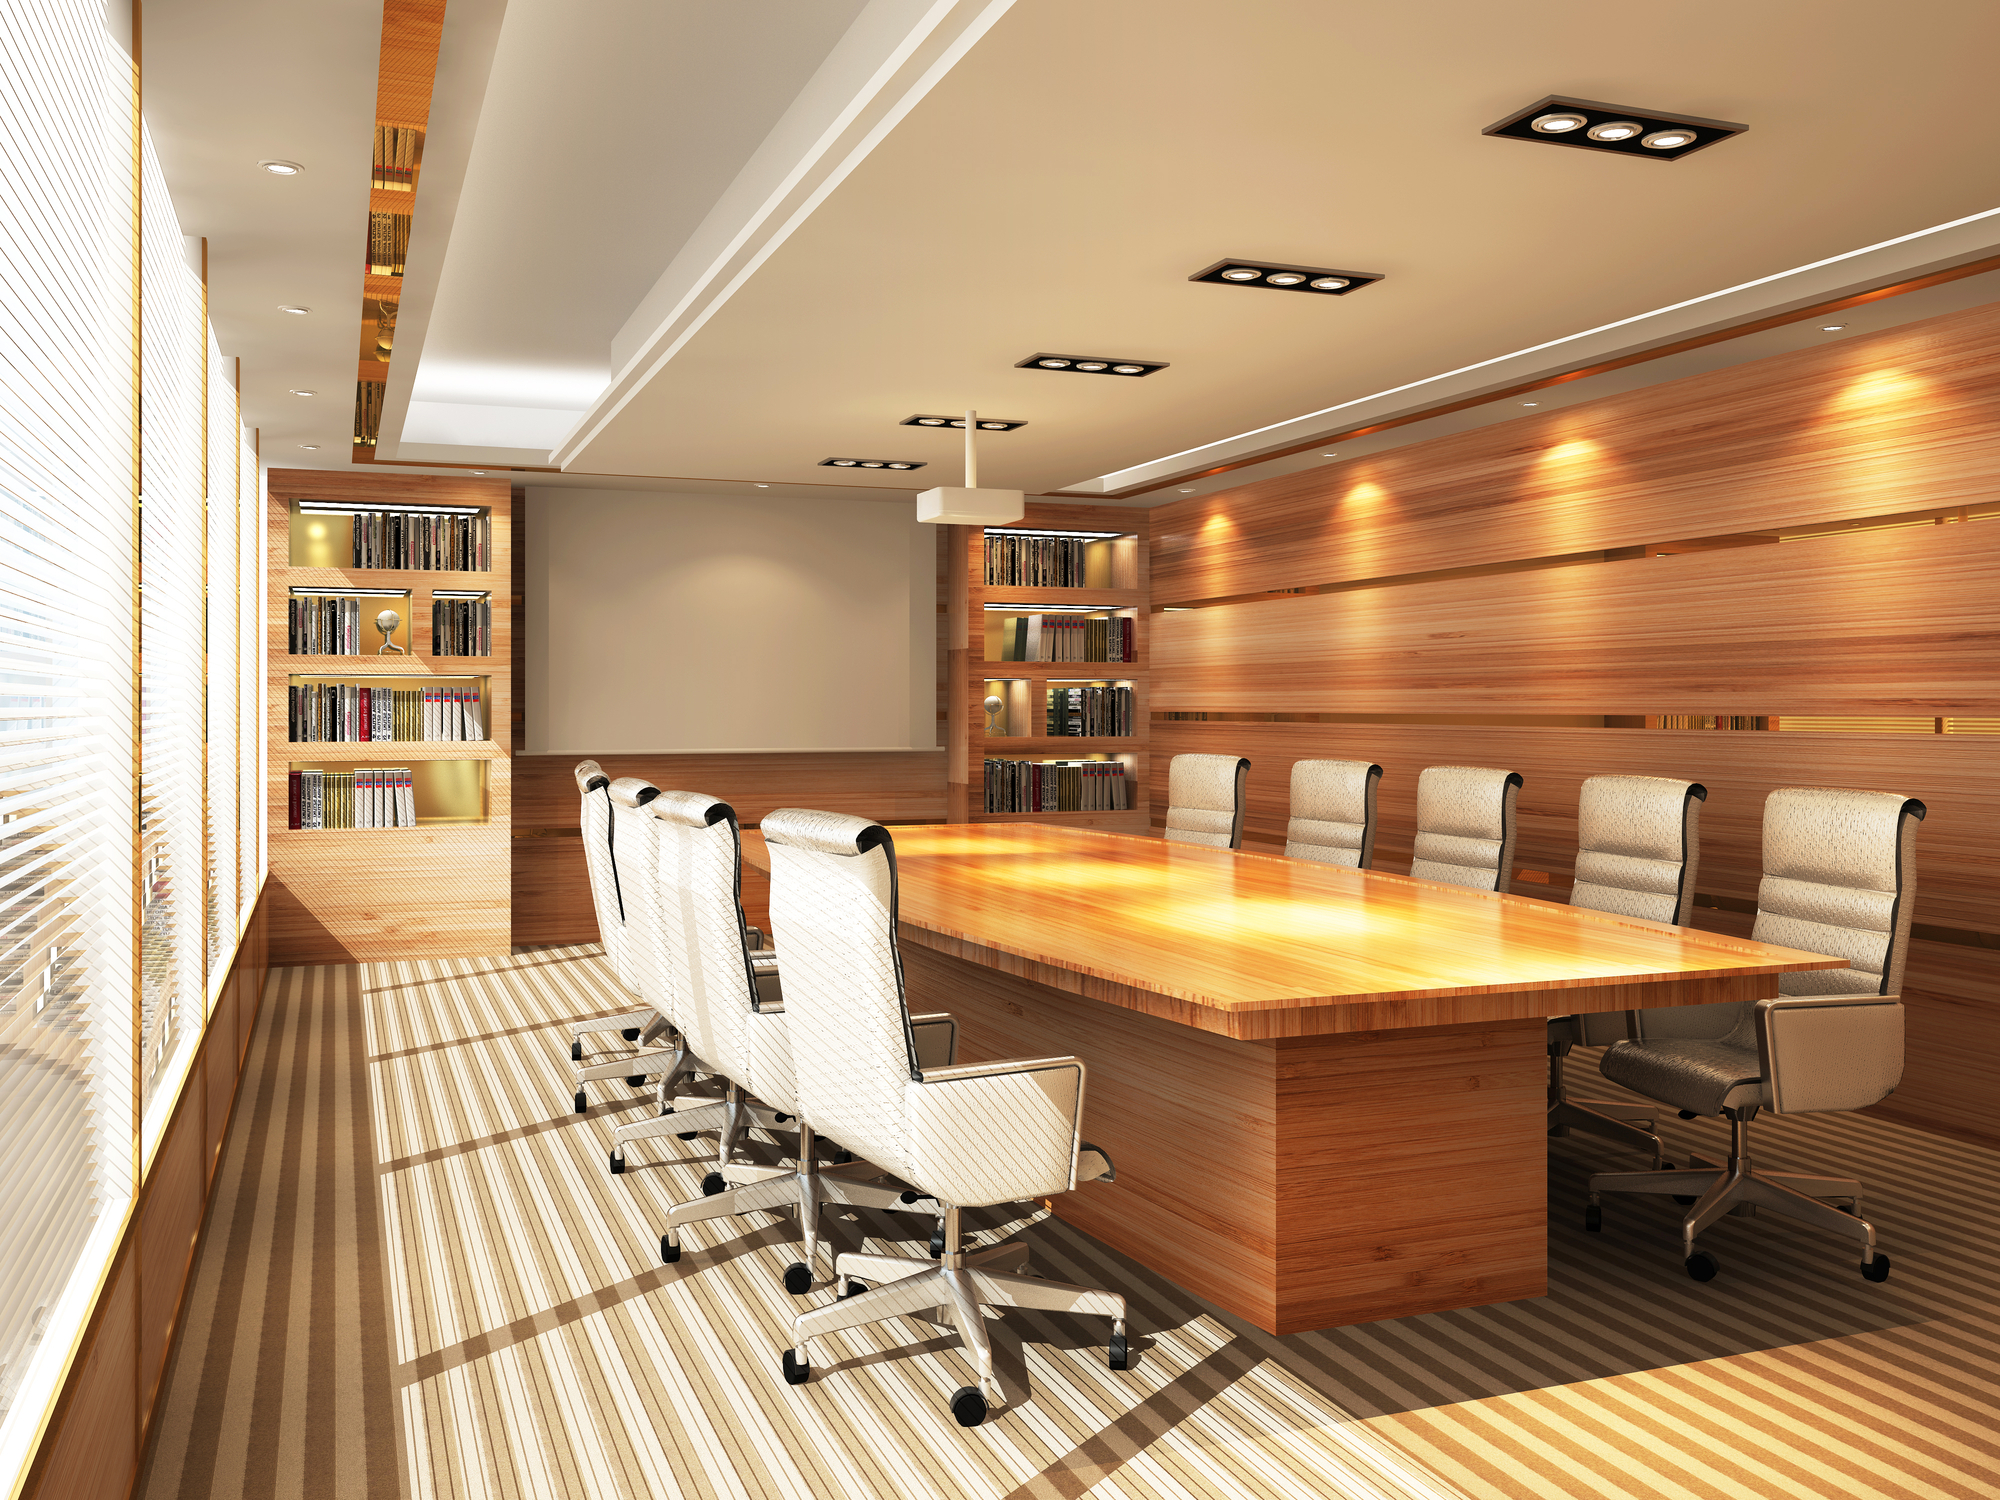 A conference table in a room.